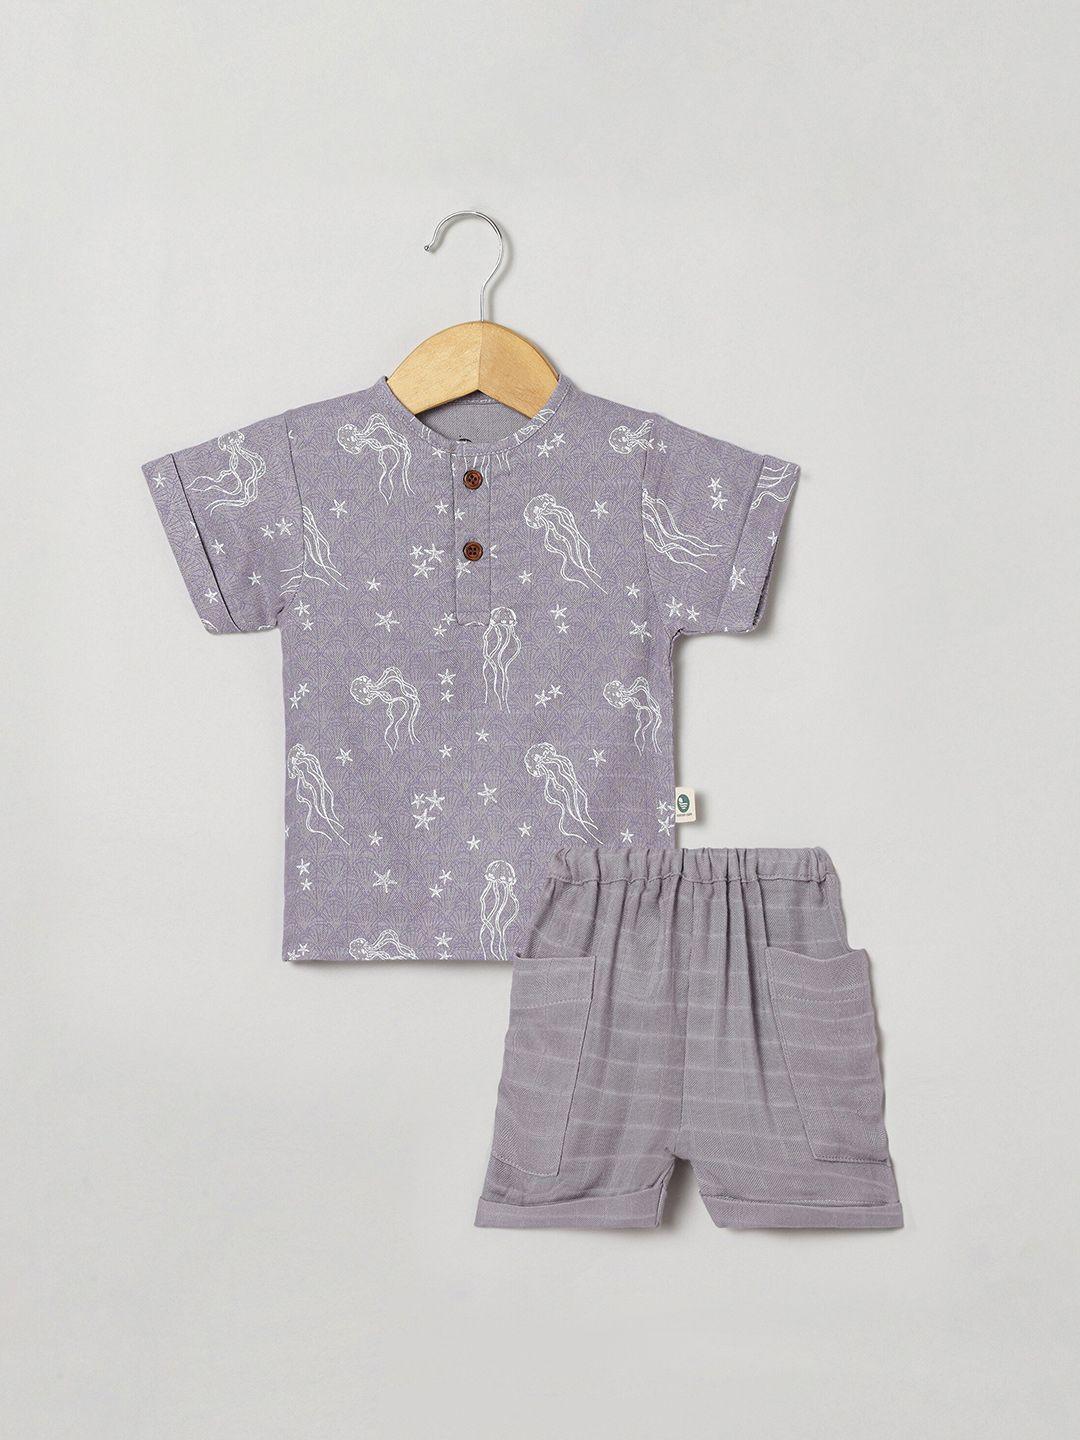 cocoon care unisex kids lavender & white printed t-shirt with shorts